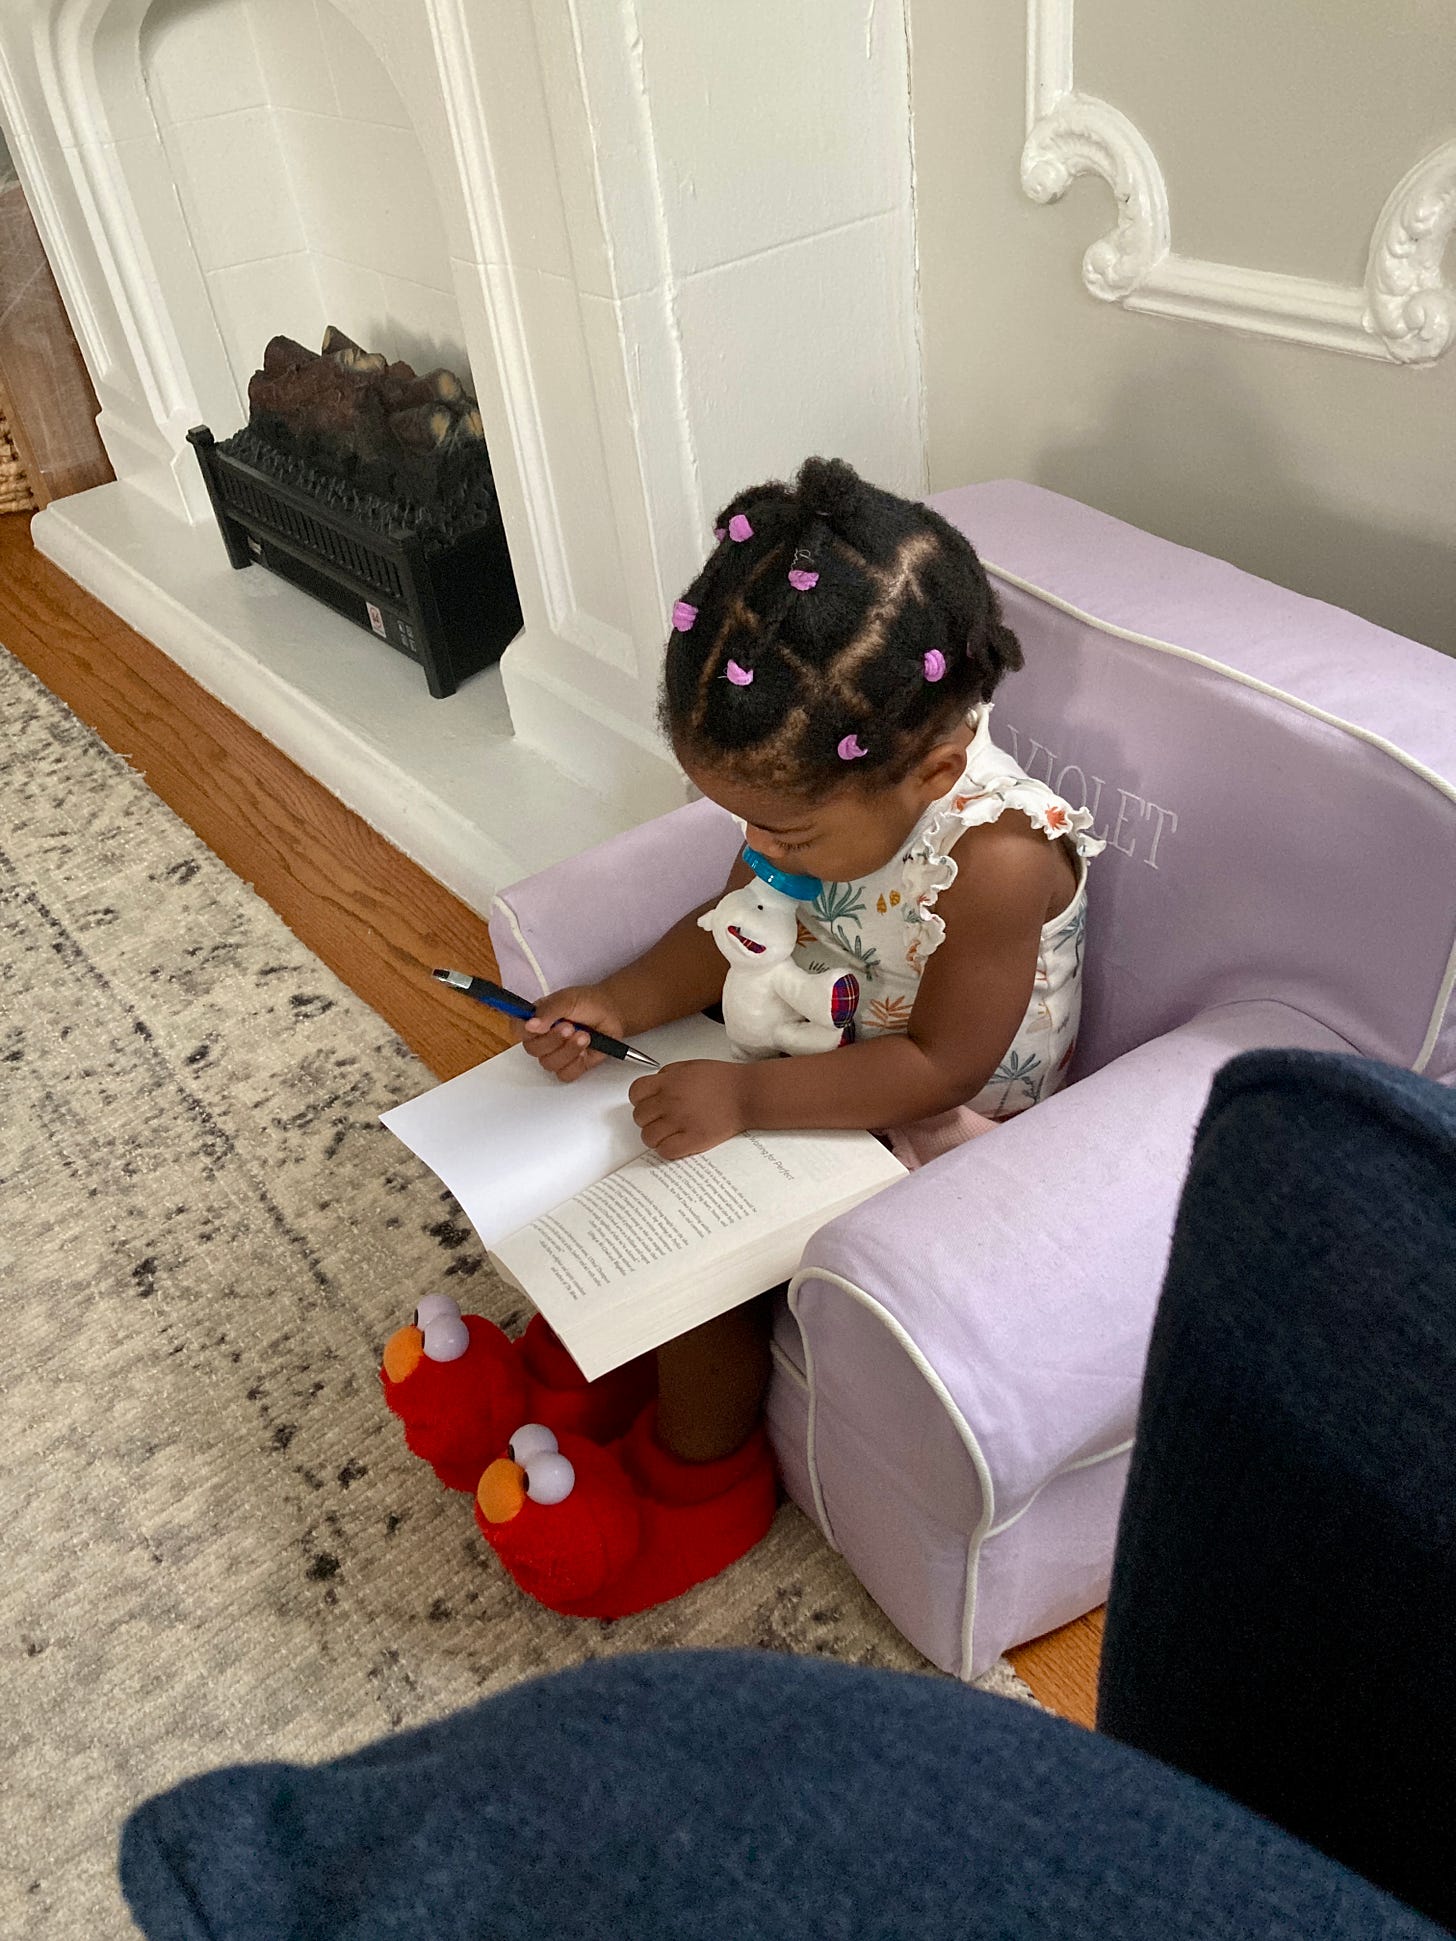 Picture of a Black toddler girl sitting on a kid-sized purple chair with a pen in her hand a book in her lap wearing Elmo slippers